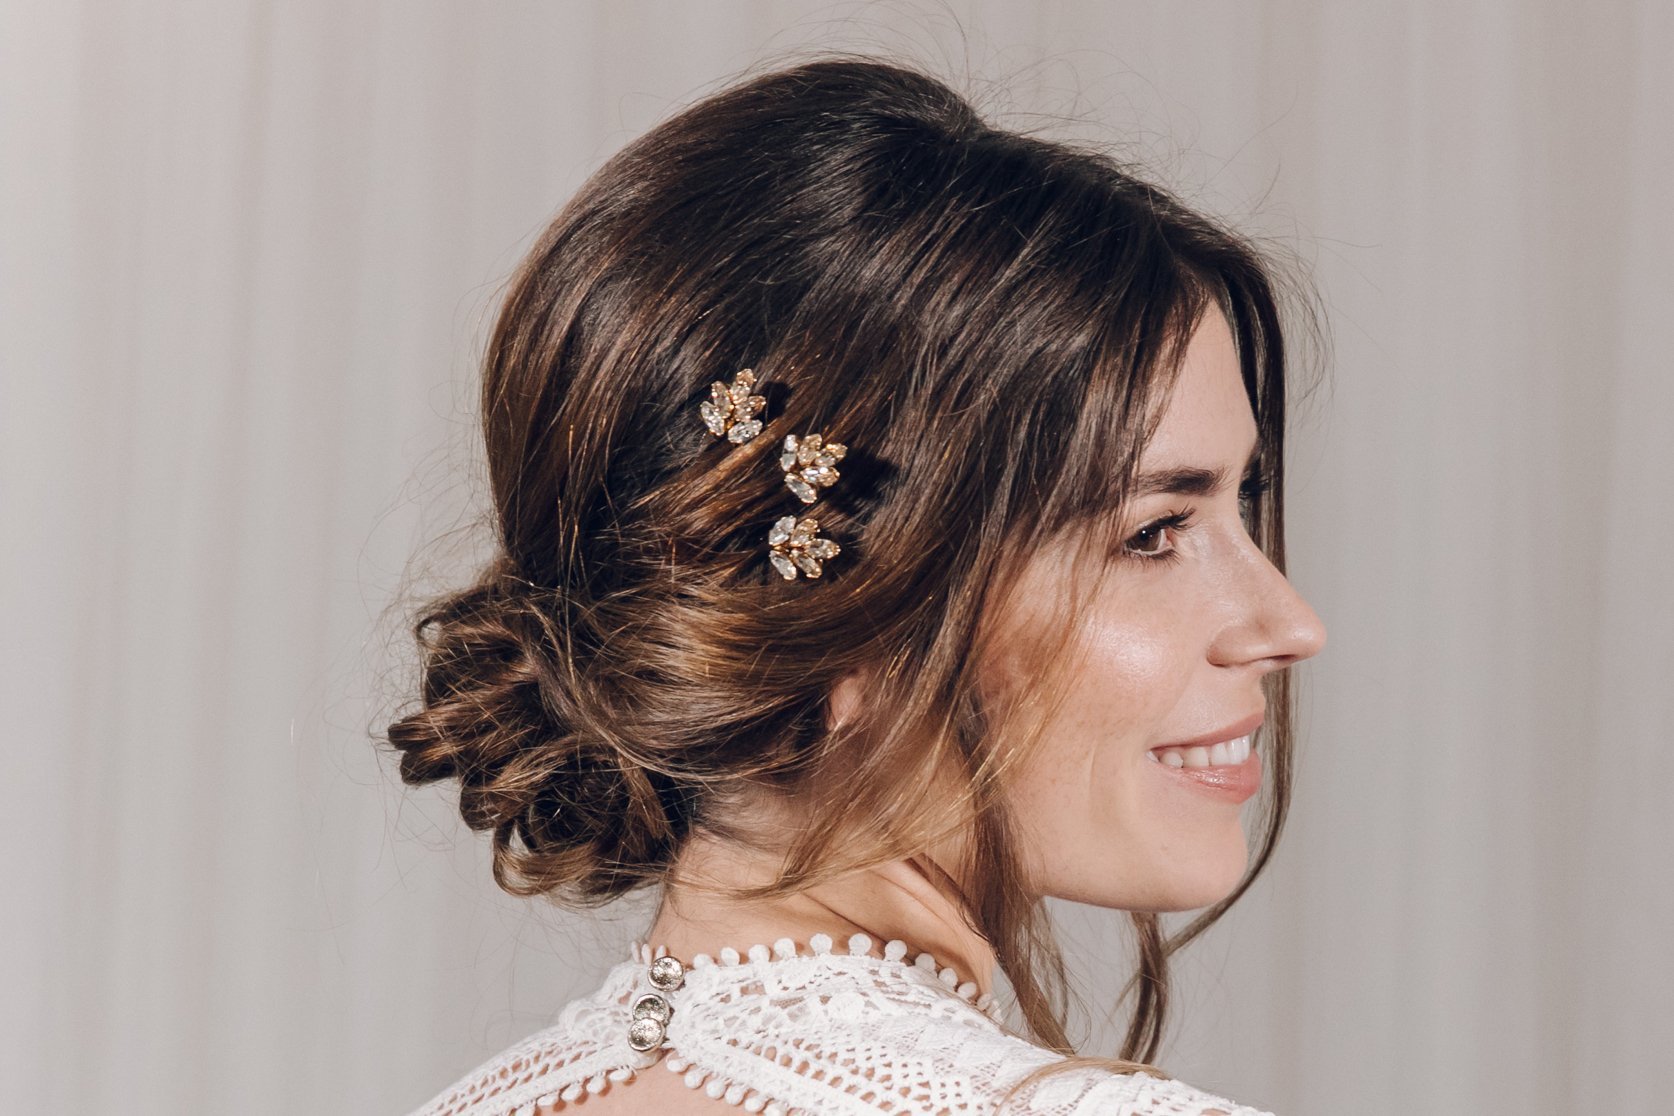 Welcome to the Stardust 2019 wedding accessories collection by Debbie Carlisle